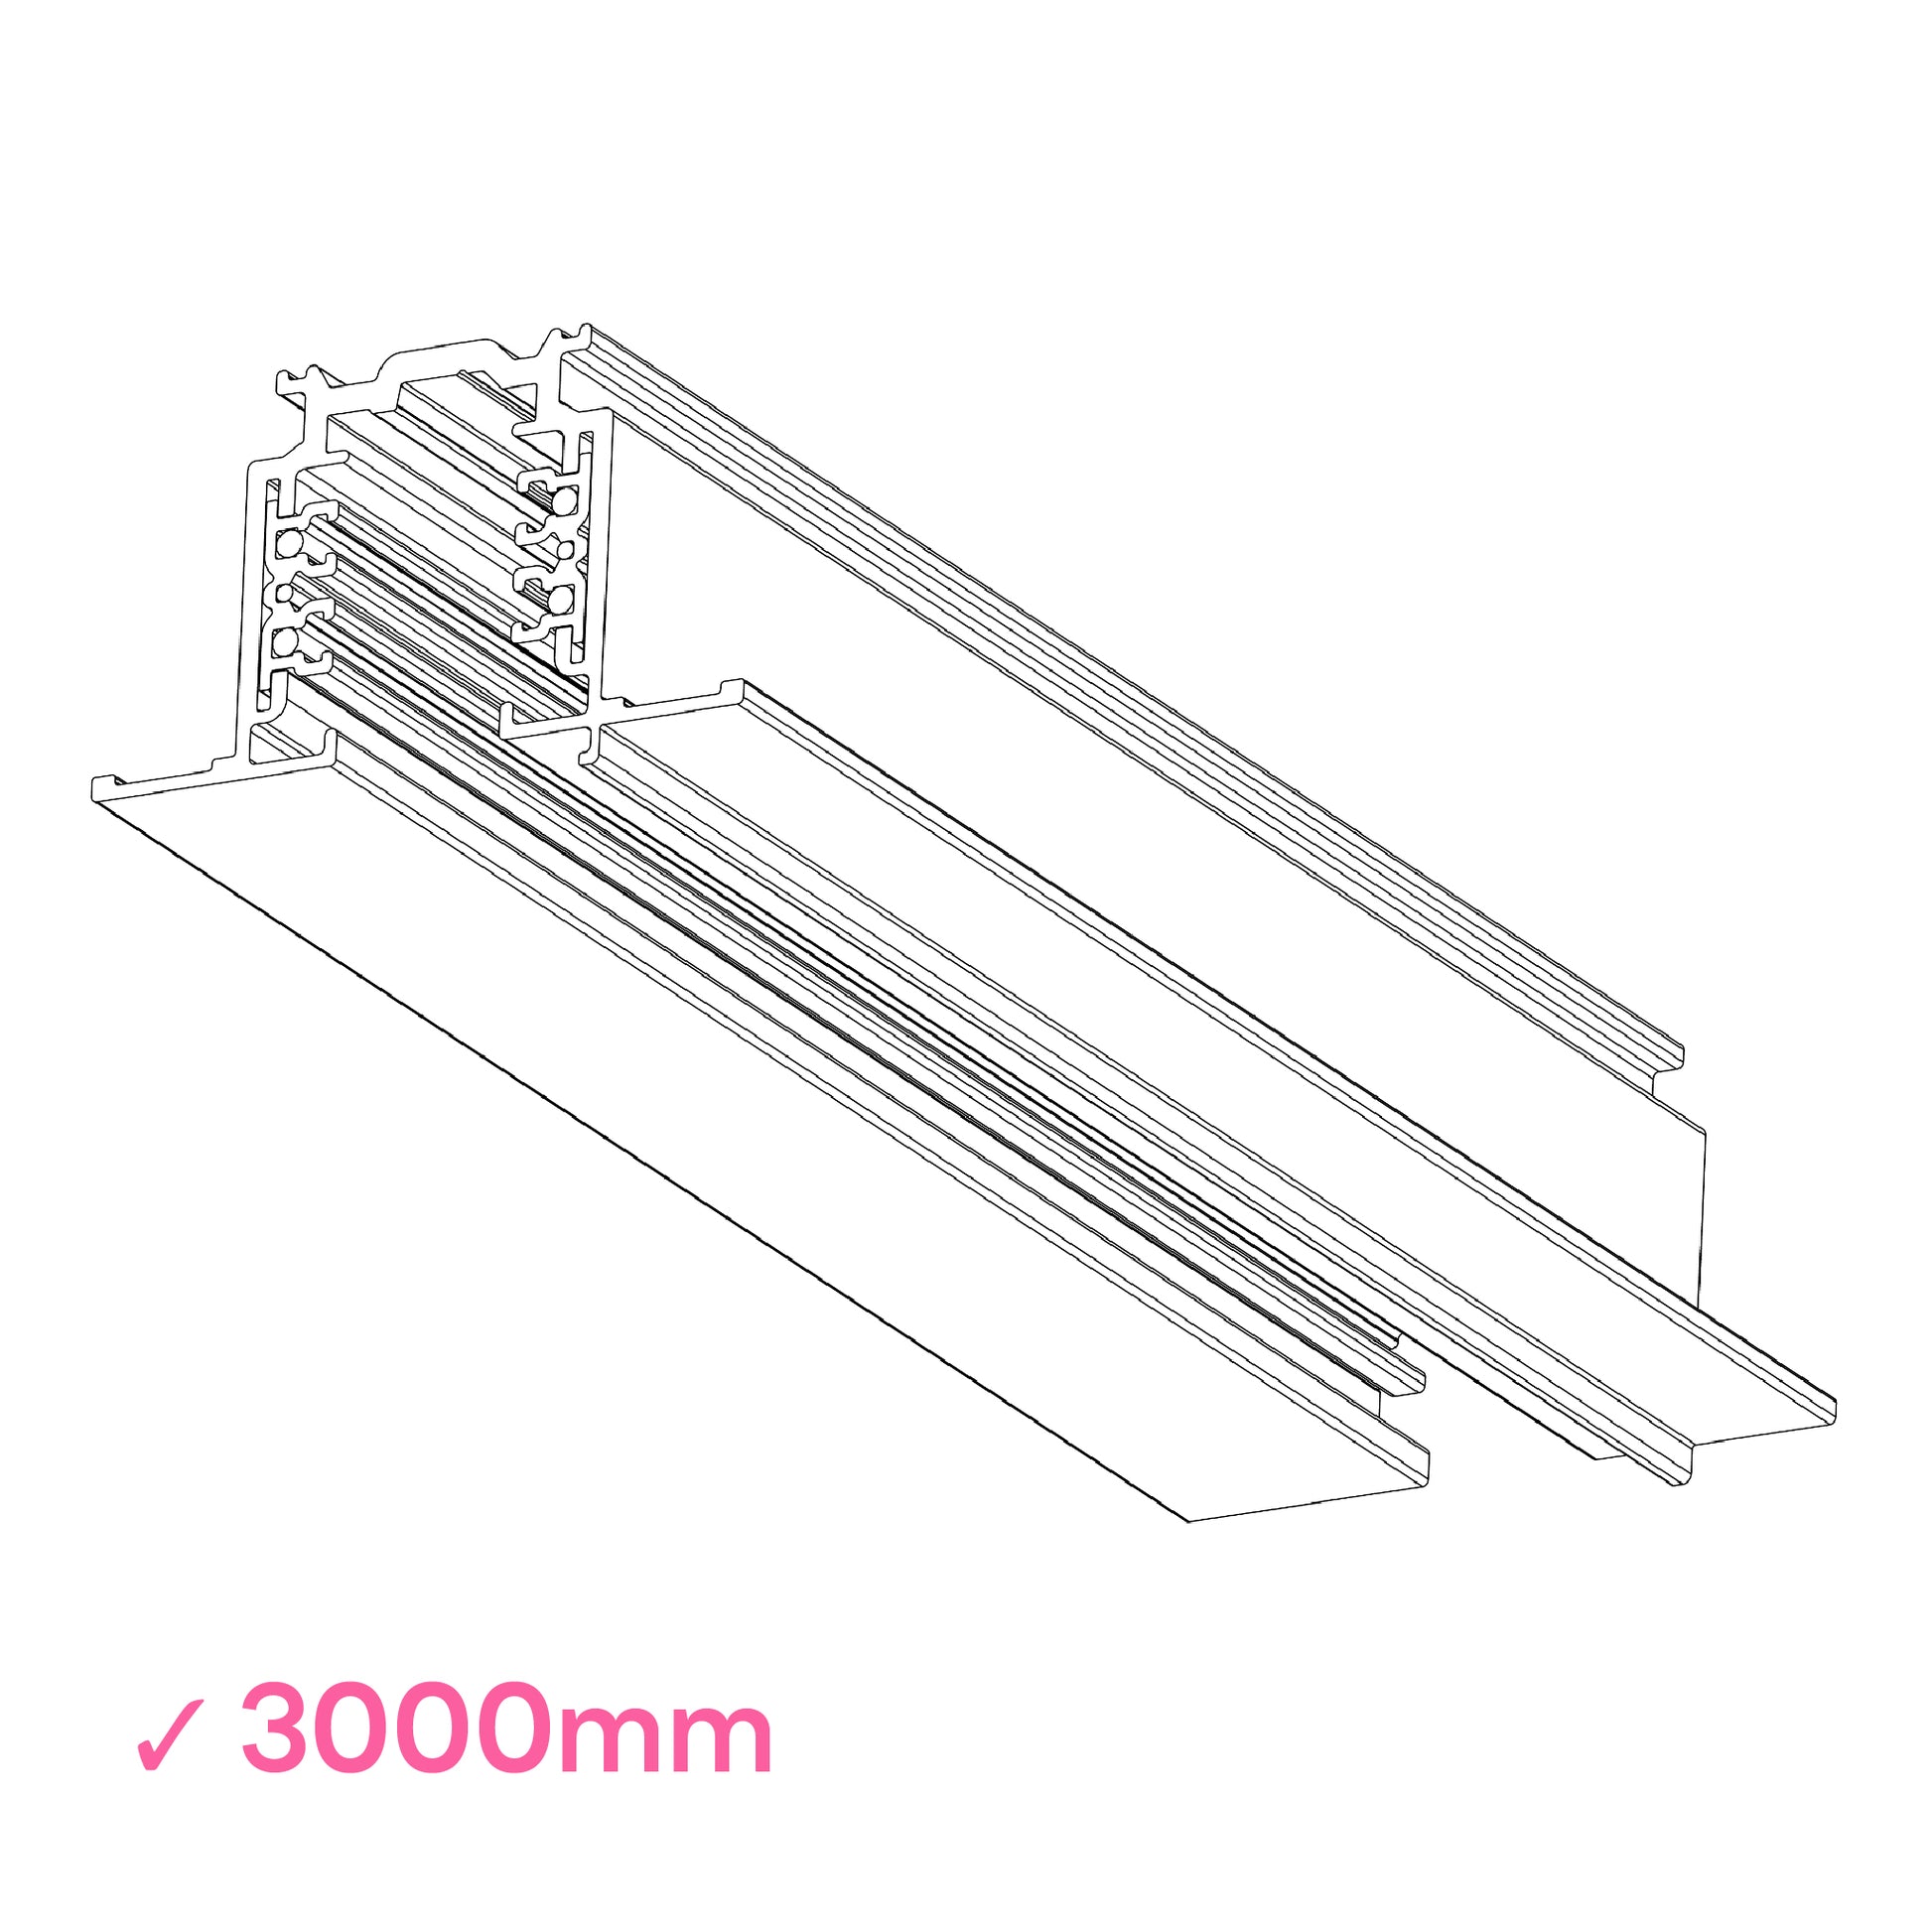 Global 3000mm or 3m white powder coated DALI 3 Circuit Track 3 metre recessed mounted track by Nordic Aluminium <XTSCF6300-3>